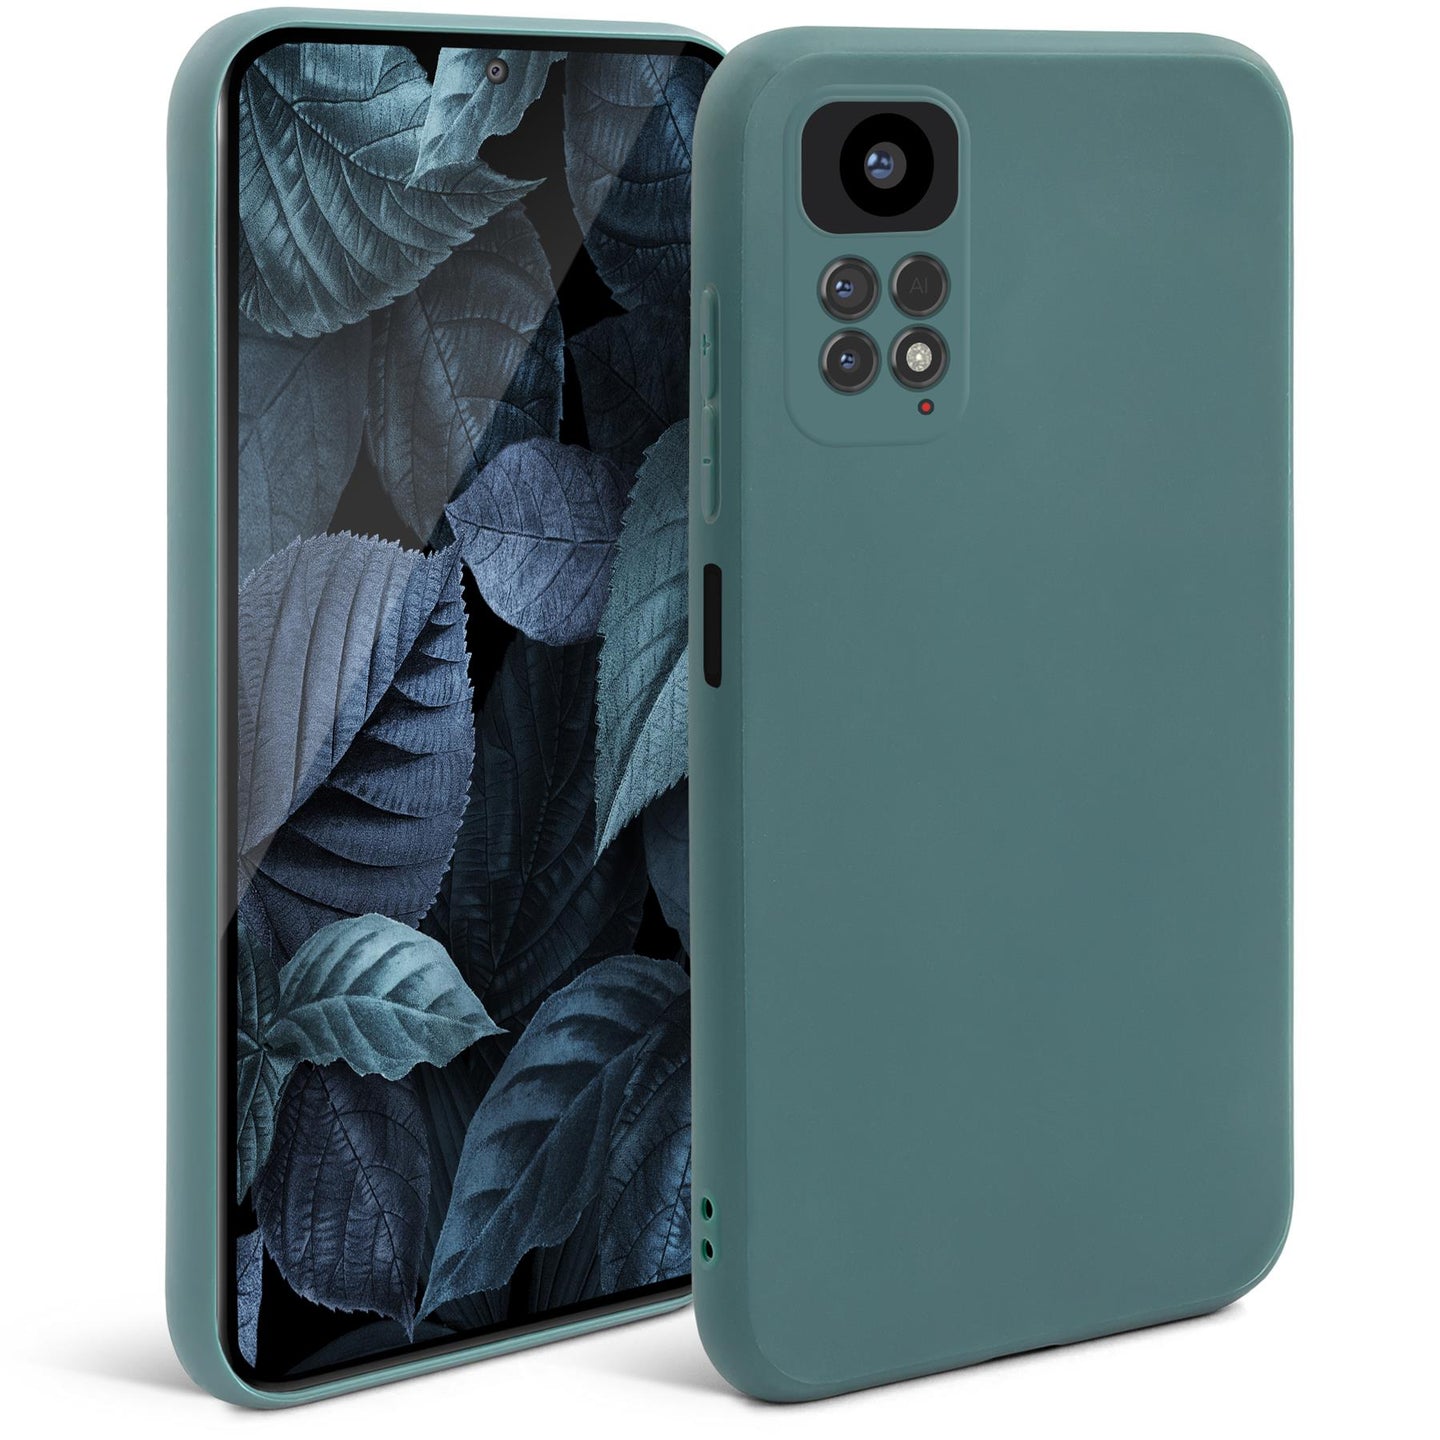 Moozy Minimalist Series Silicone Case for Xiaomi Redmi Note 11 Pro 5G and 4G, Blue Grey - Matte Finish Lightweight Mobile Phone Case Slim Soft Protective TPU Cover with Matte Surface